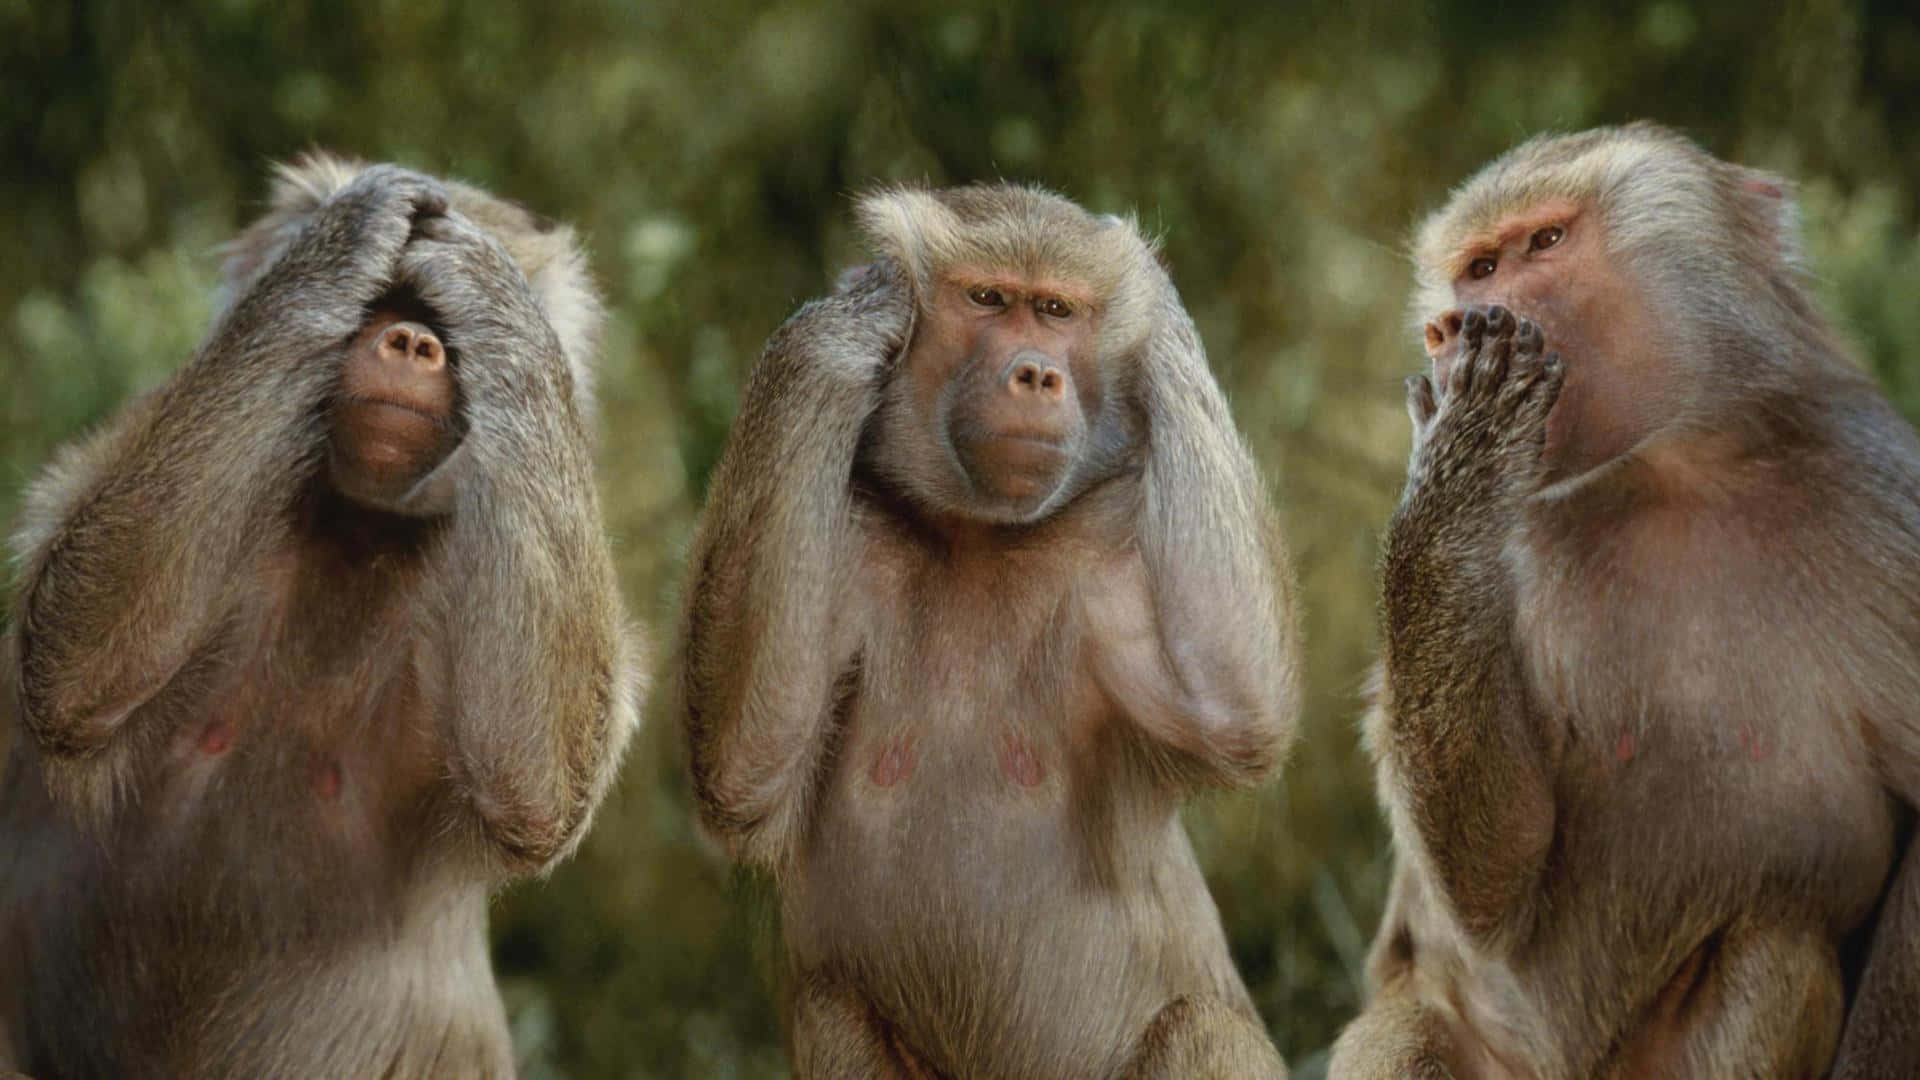 Three Monkeys With Their Hands Covering Their Eyes